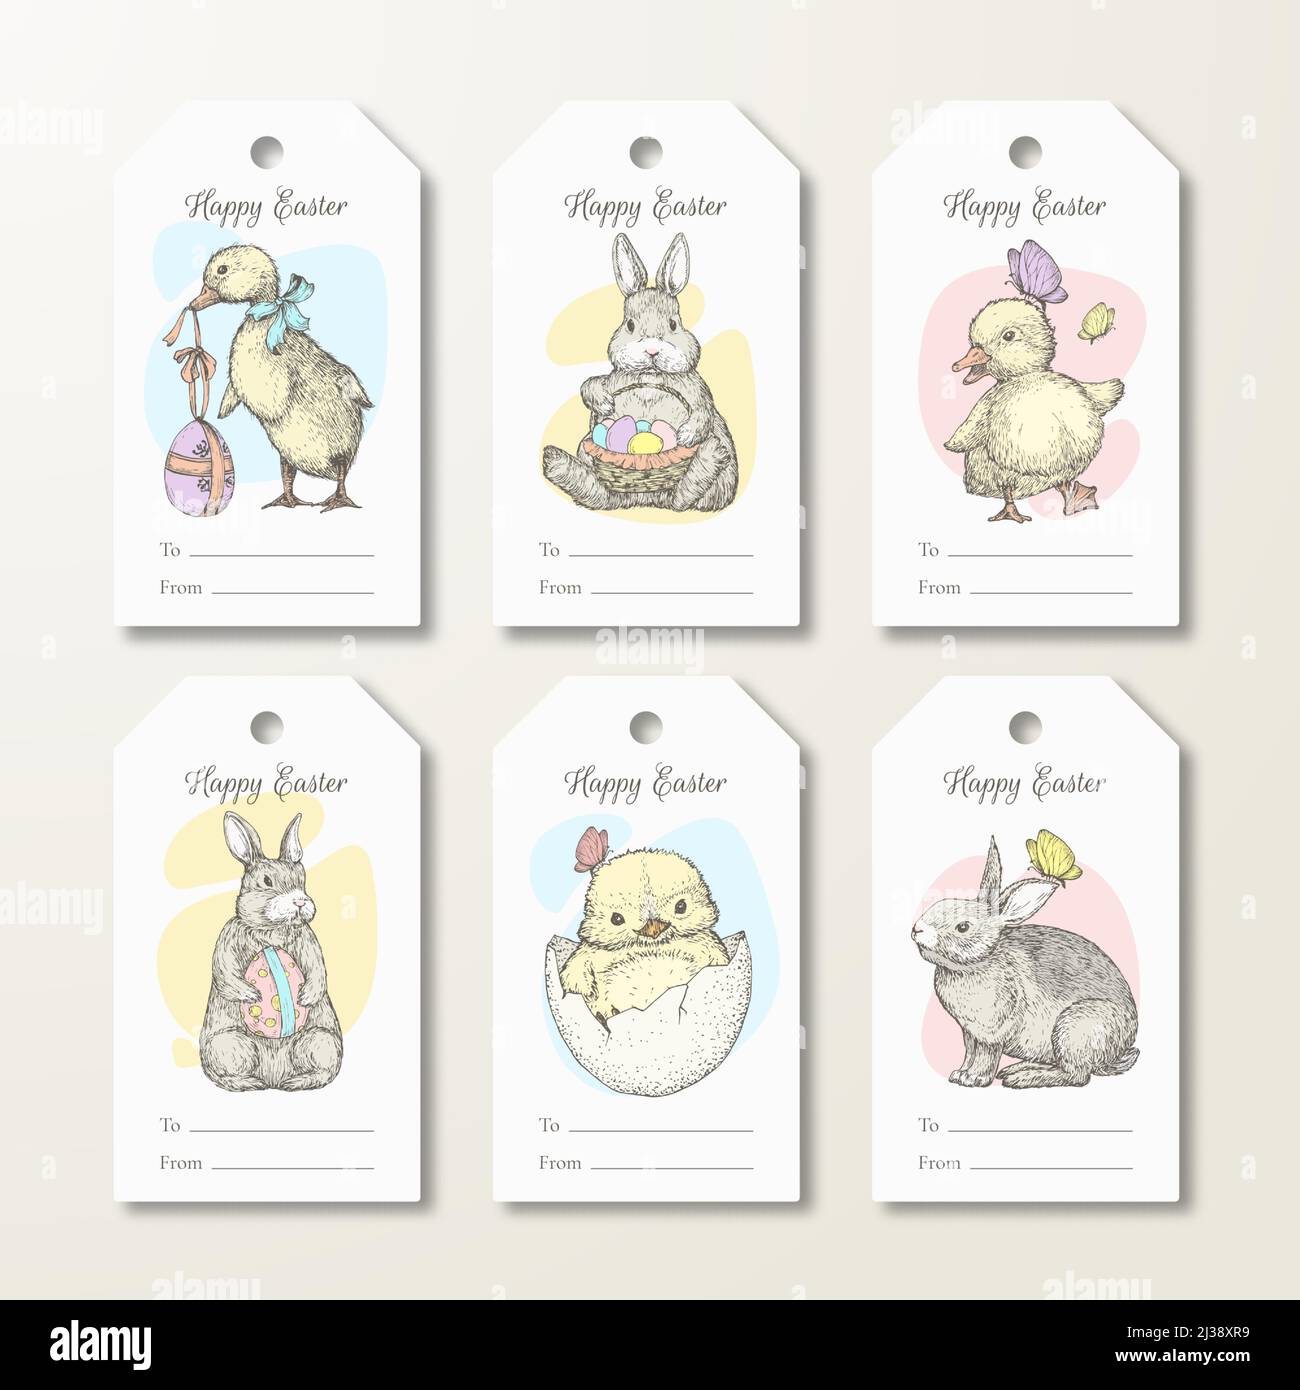 Happy Easter Greeting Cards or Ready-to-Use Gift Tags or Labels Templates Set. Hand Drawn Cute Animals and Birds Sketch Illustrations. Spring Holiday Stock Vector